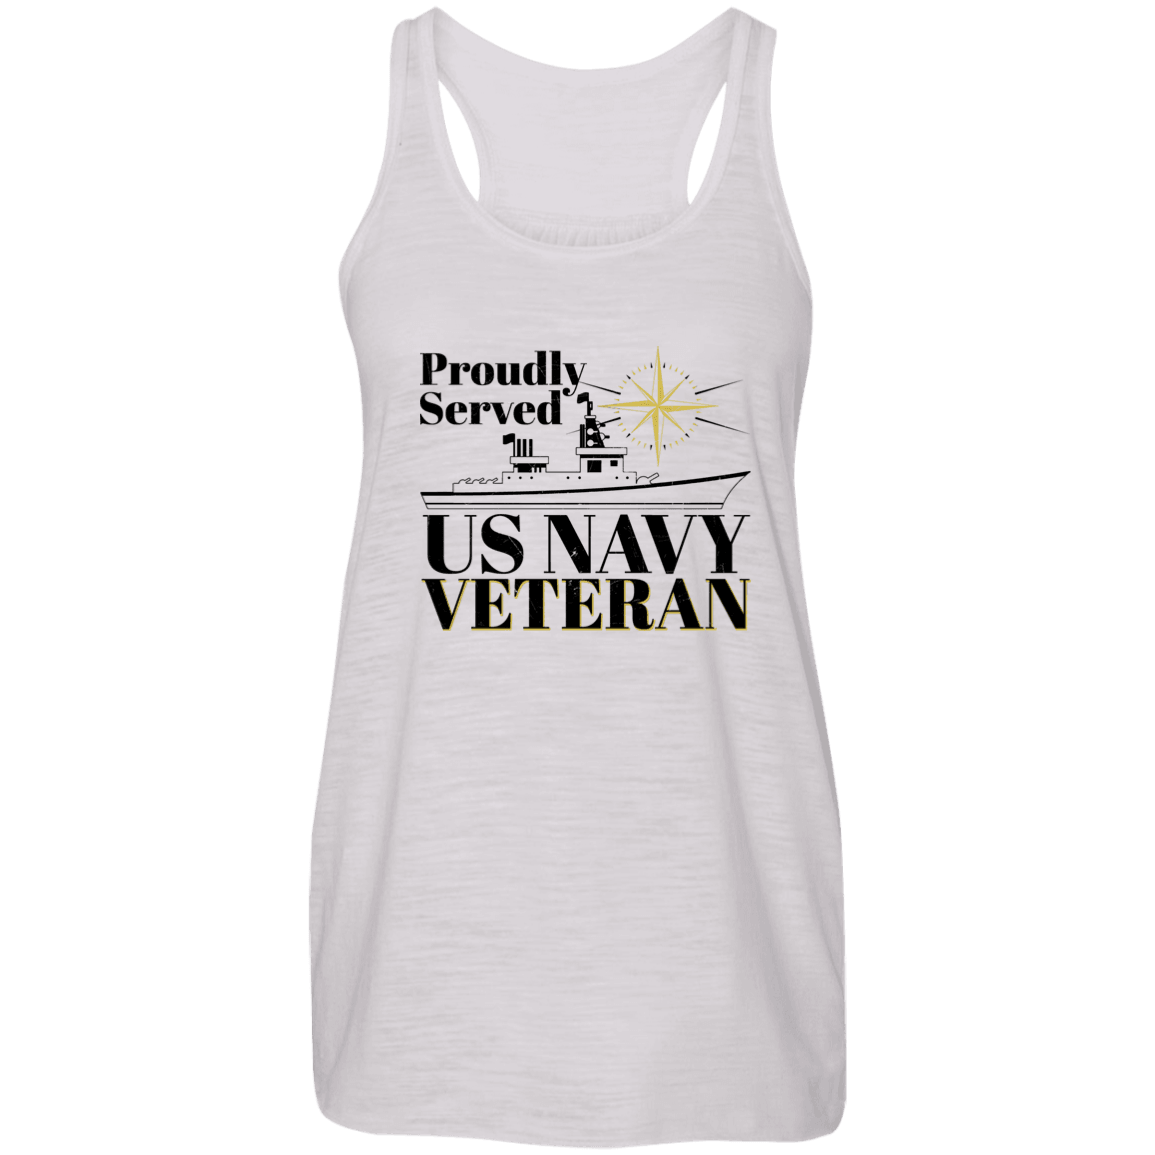 Designs by MyUtopia Shout Out:Proudly Served US Navy Veteran Ladies Flowy Racer-back Tank Top,X-Small / Vintage White,T-Shirts